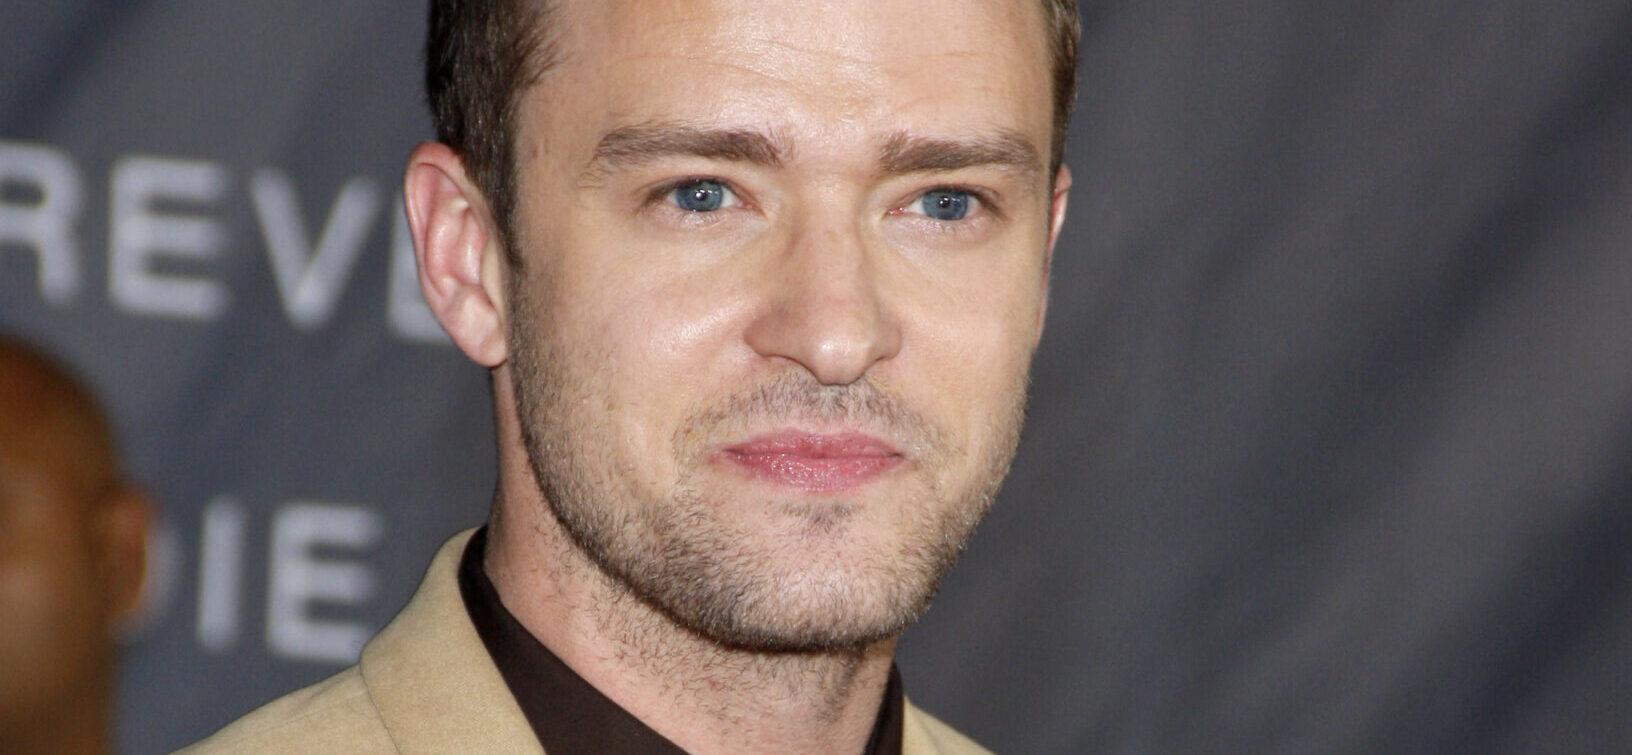 Justin Timberlake at the Los Angeles premiere of 'In Time' - Arrivals